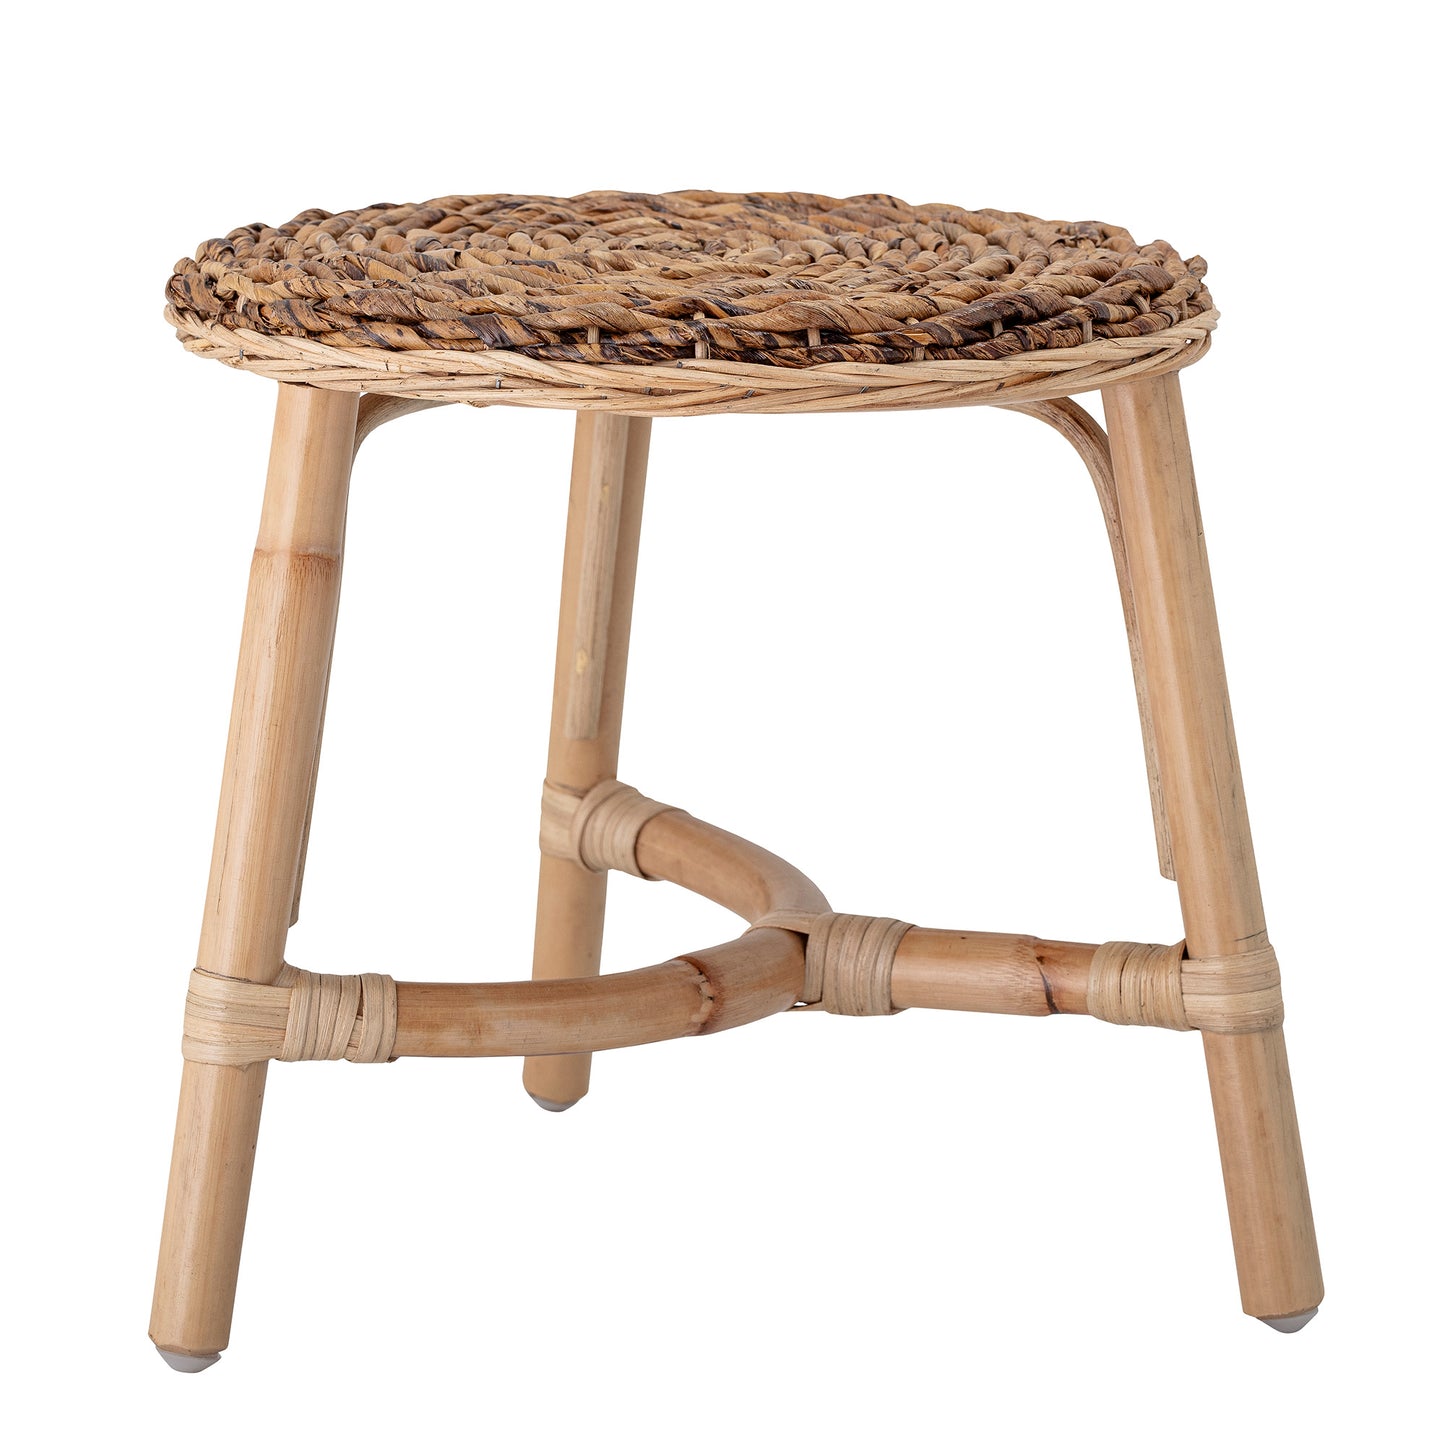 The seat on this children's stool is made from banana palms and the legs are made from rattan. It is very stable and fits into any kids room perfectly.   Dimensions: D32,5xH32 cm  Banana Palm Bark, Rattan  Wipe clean with a moist cloth.  Variations in size & shape may occur due to materials. Indoor use only